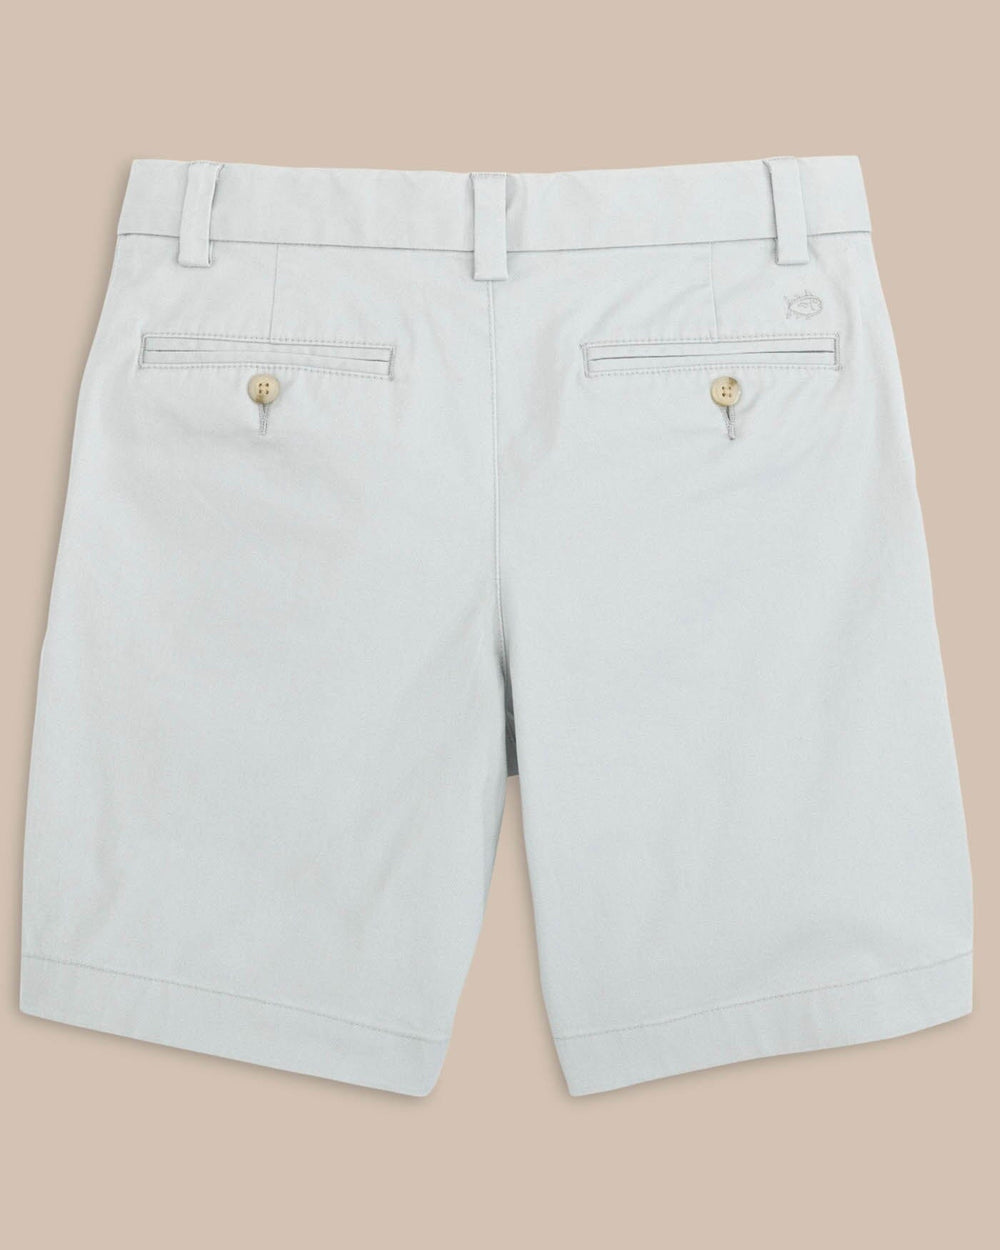 The back view of the Boys Channel Marker Short by Southern Tide - Seagull Grey